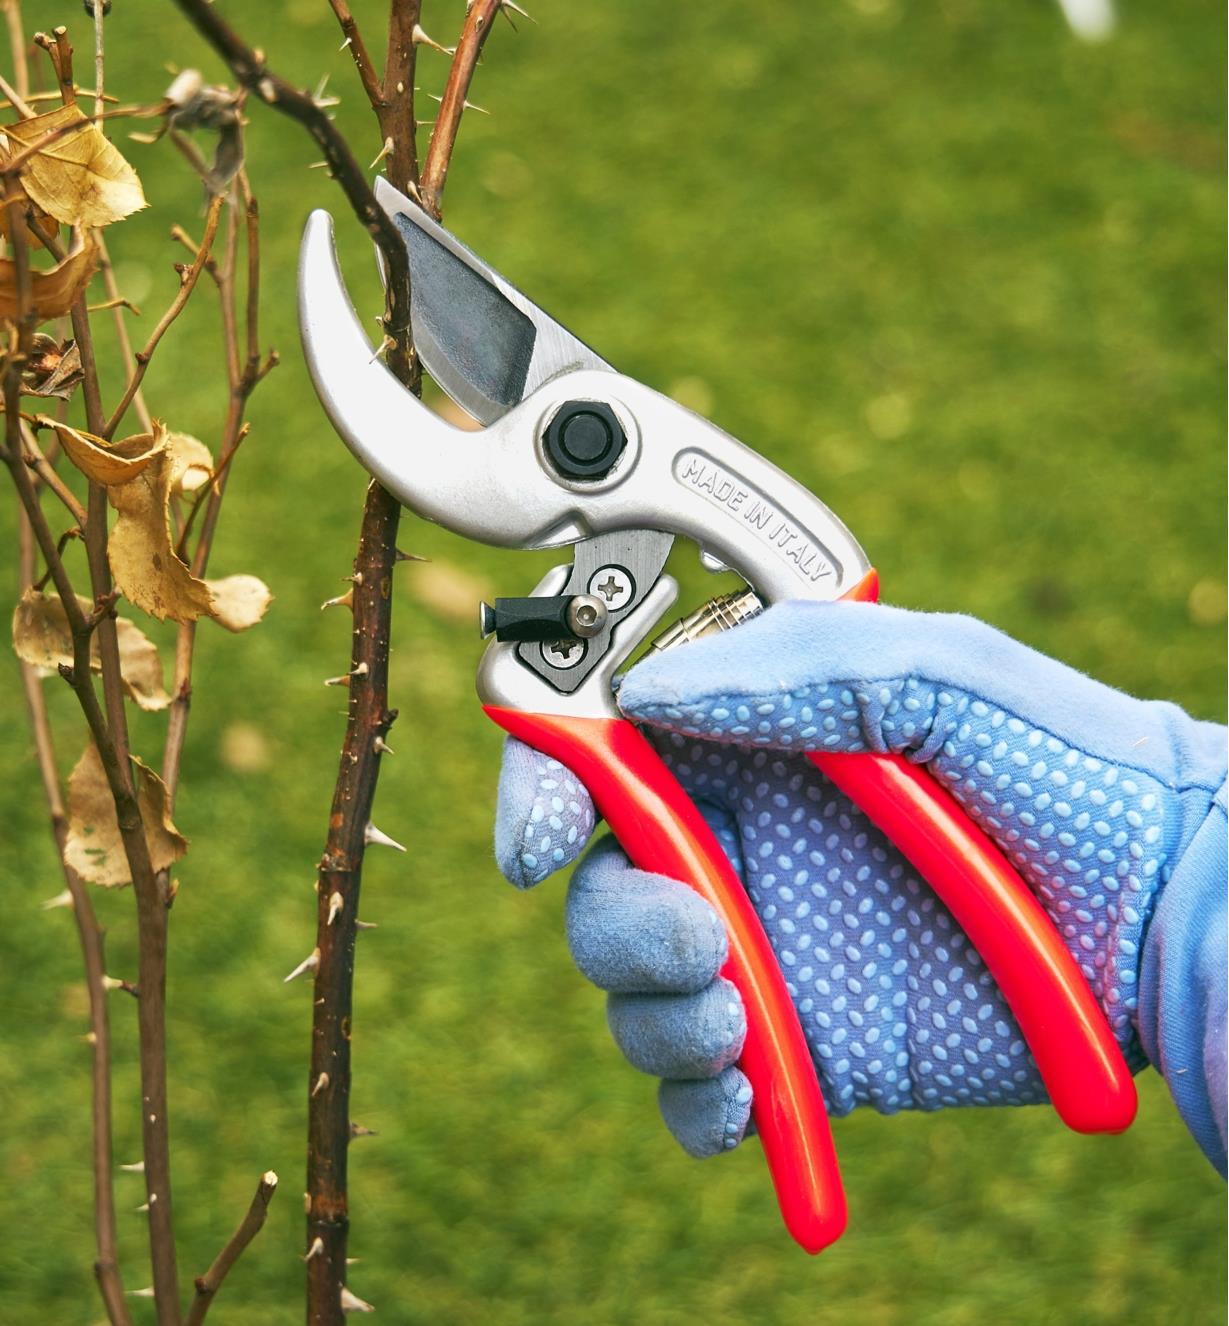 Cutting woody stems with the Castellari curved-anvil pruner